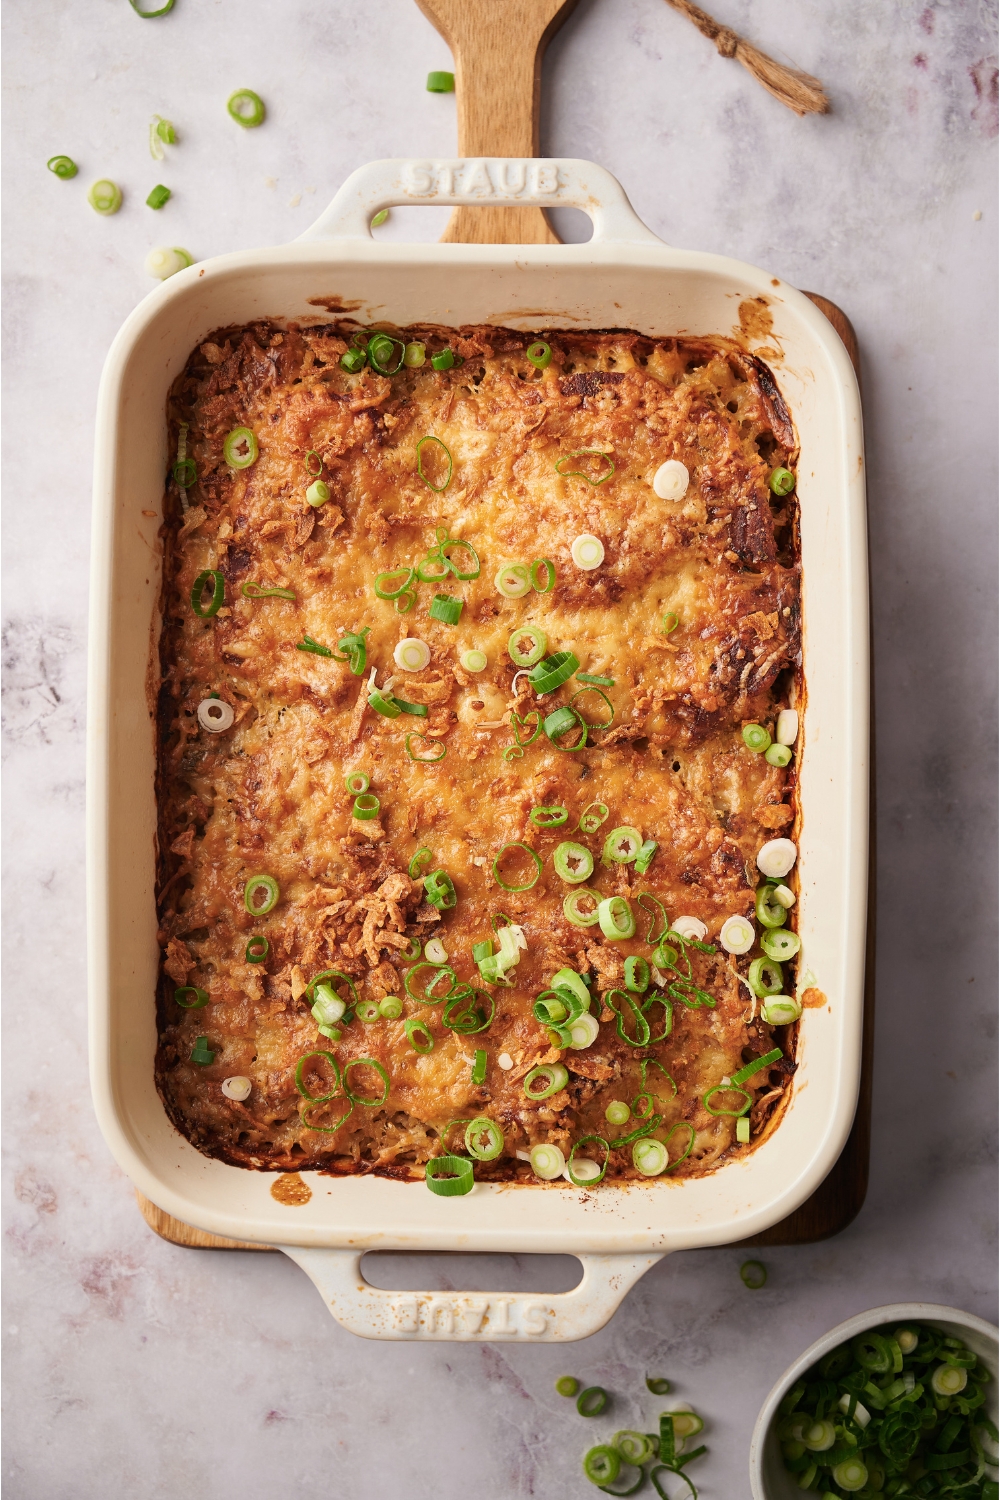 Green onions garnished on a freshly baked casserole in a white casserole dish.